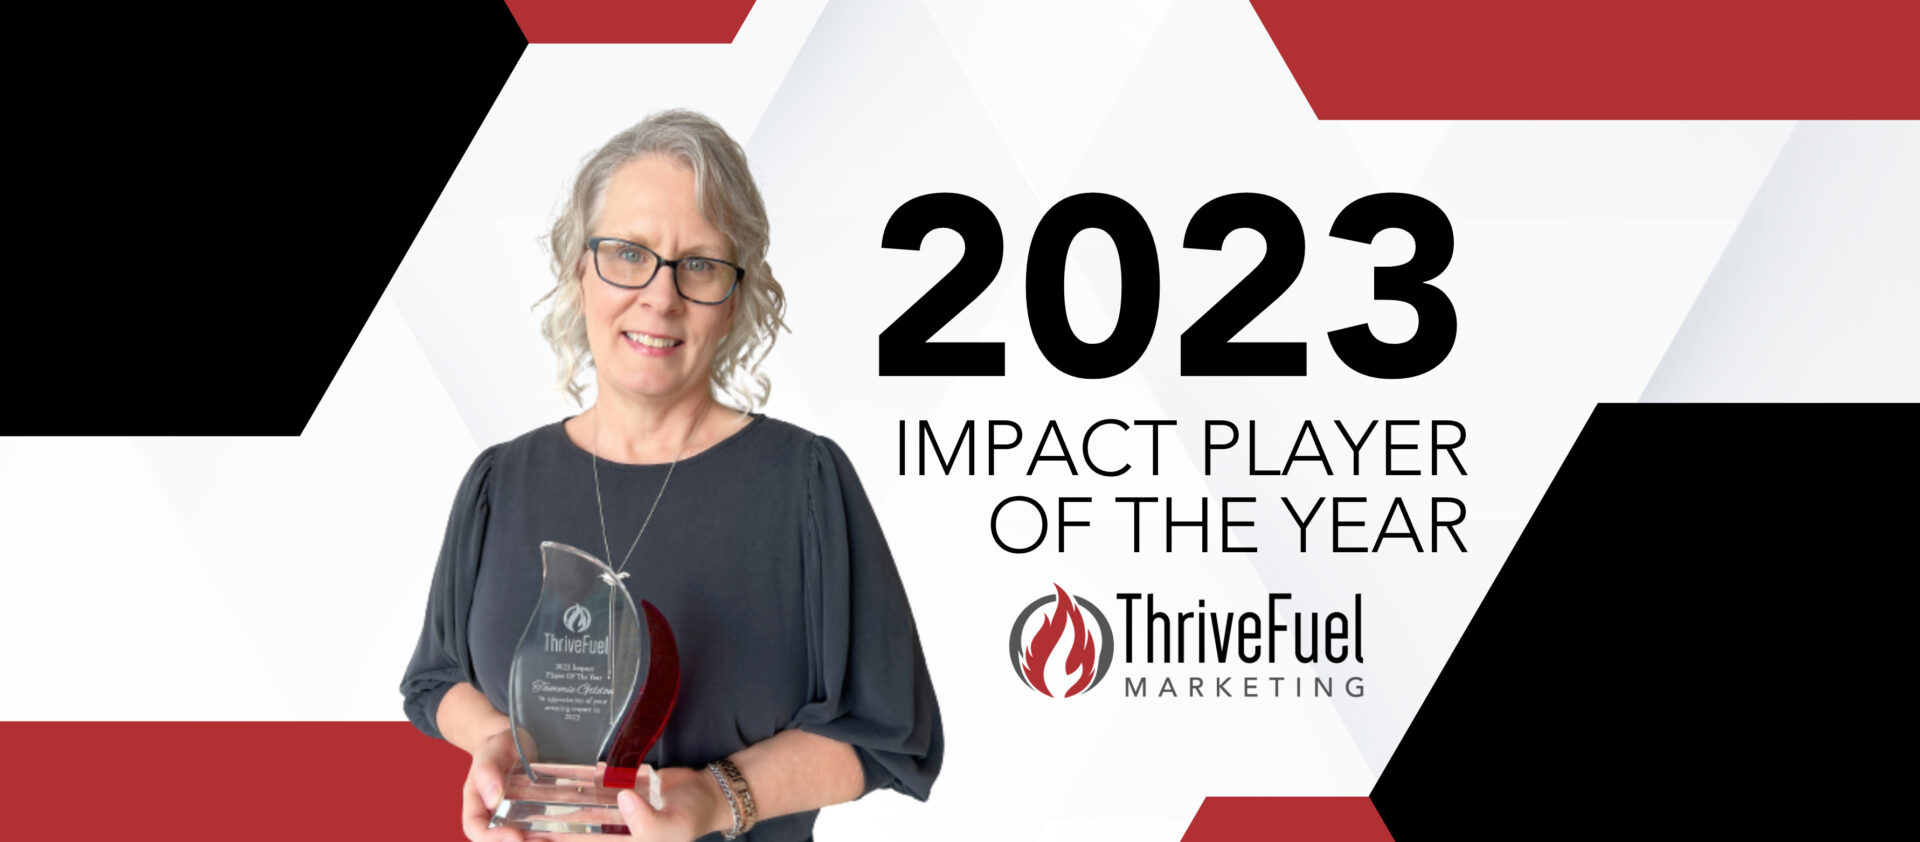 Celebrating Excellence: Tammie Gildon Named ThriveFuel Marketing’s 2023 Impact Player of the Year